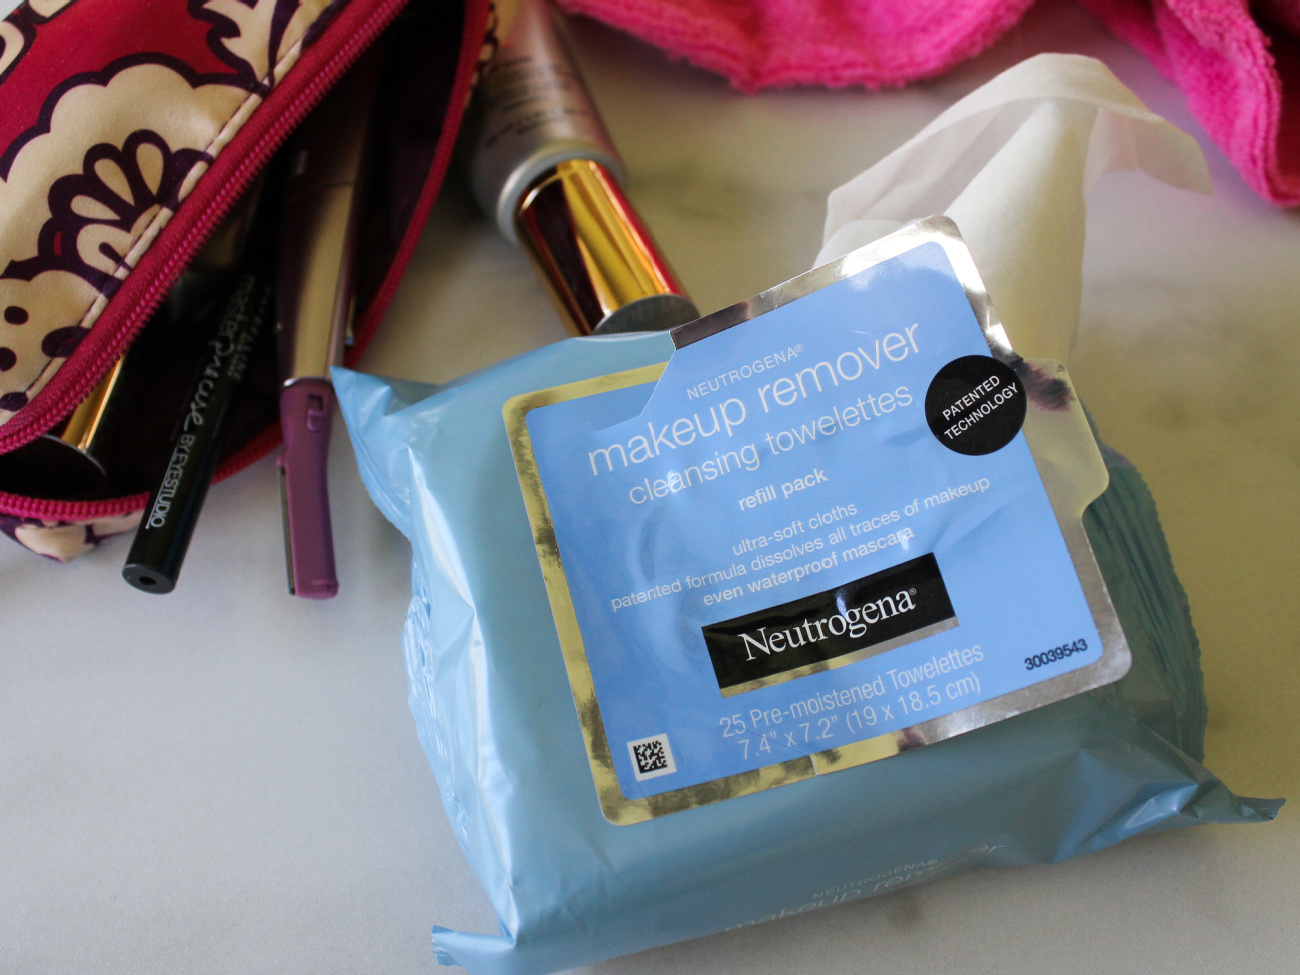 Neutrogena Makeup Remover Cleansing Towelettes As Low As $3.99 At Publix